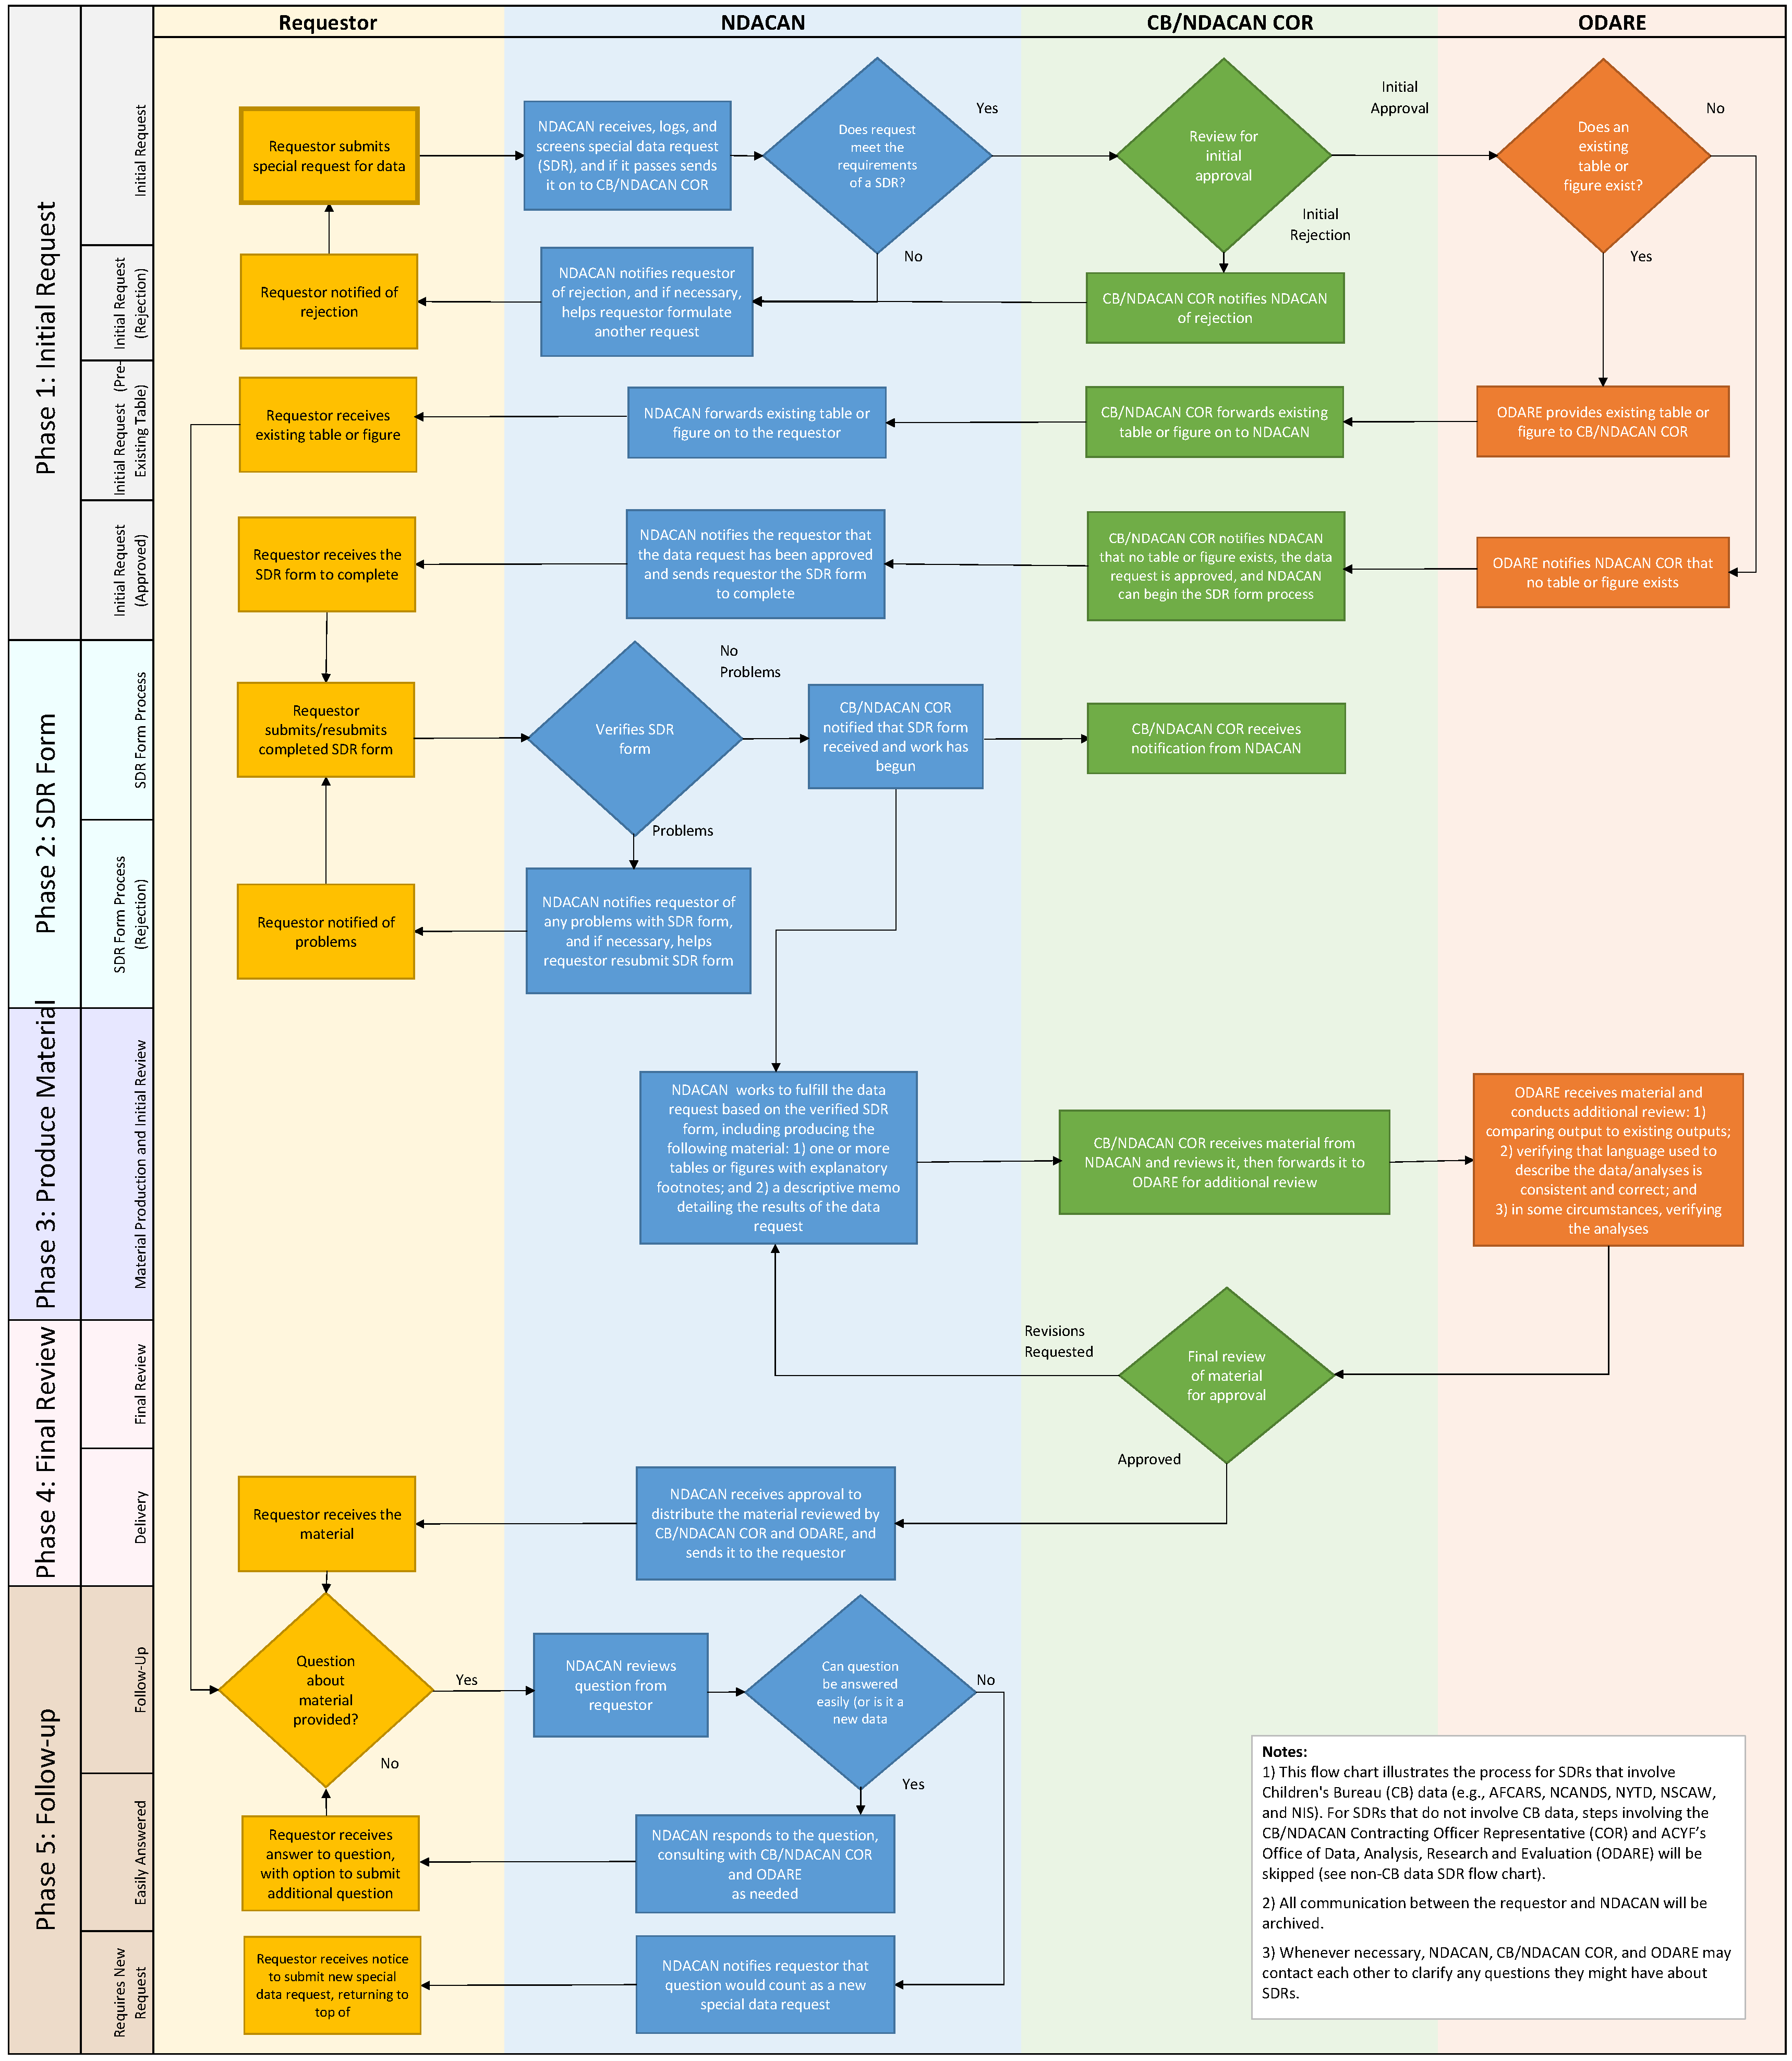 CB Data Special Data Request (SDR) Flow Chart